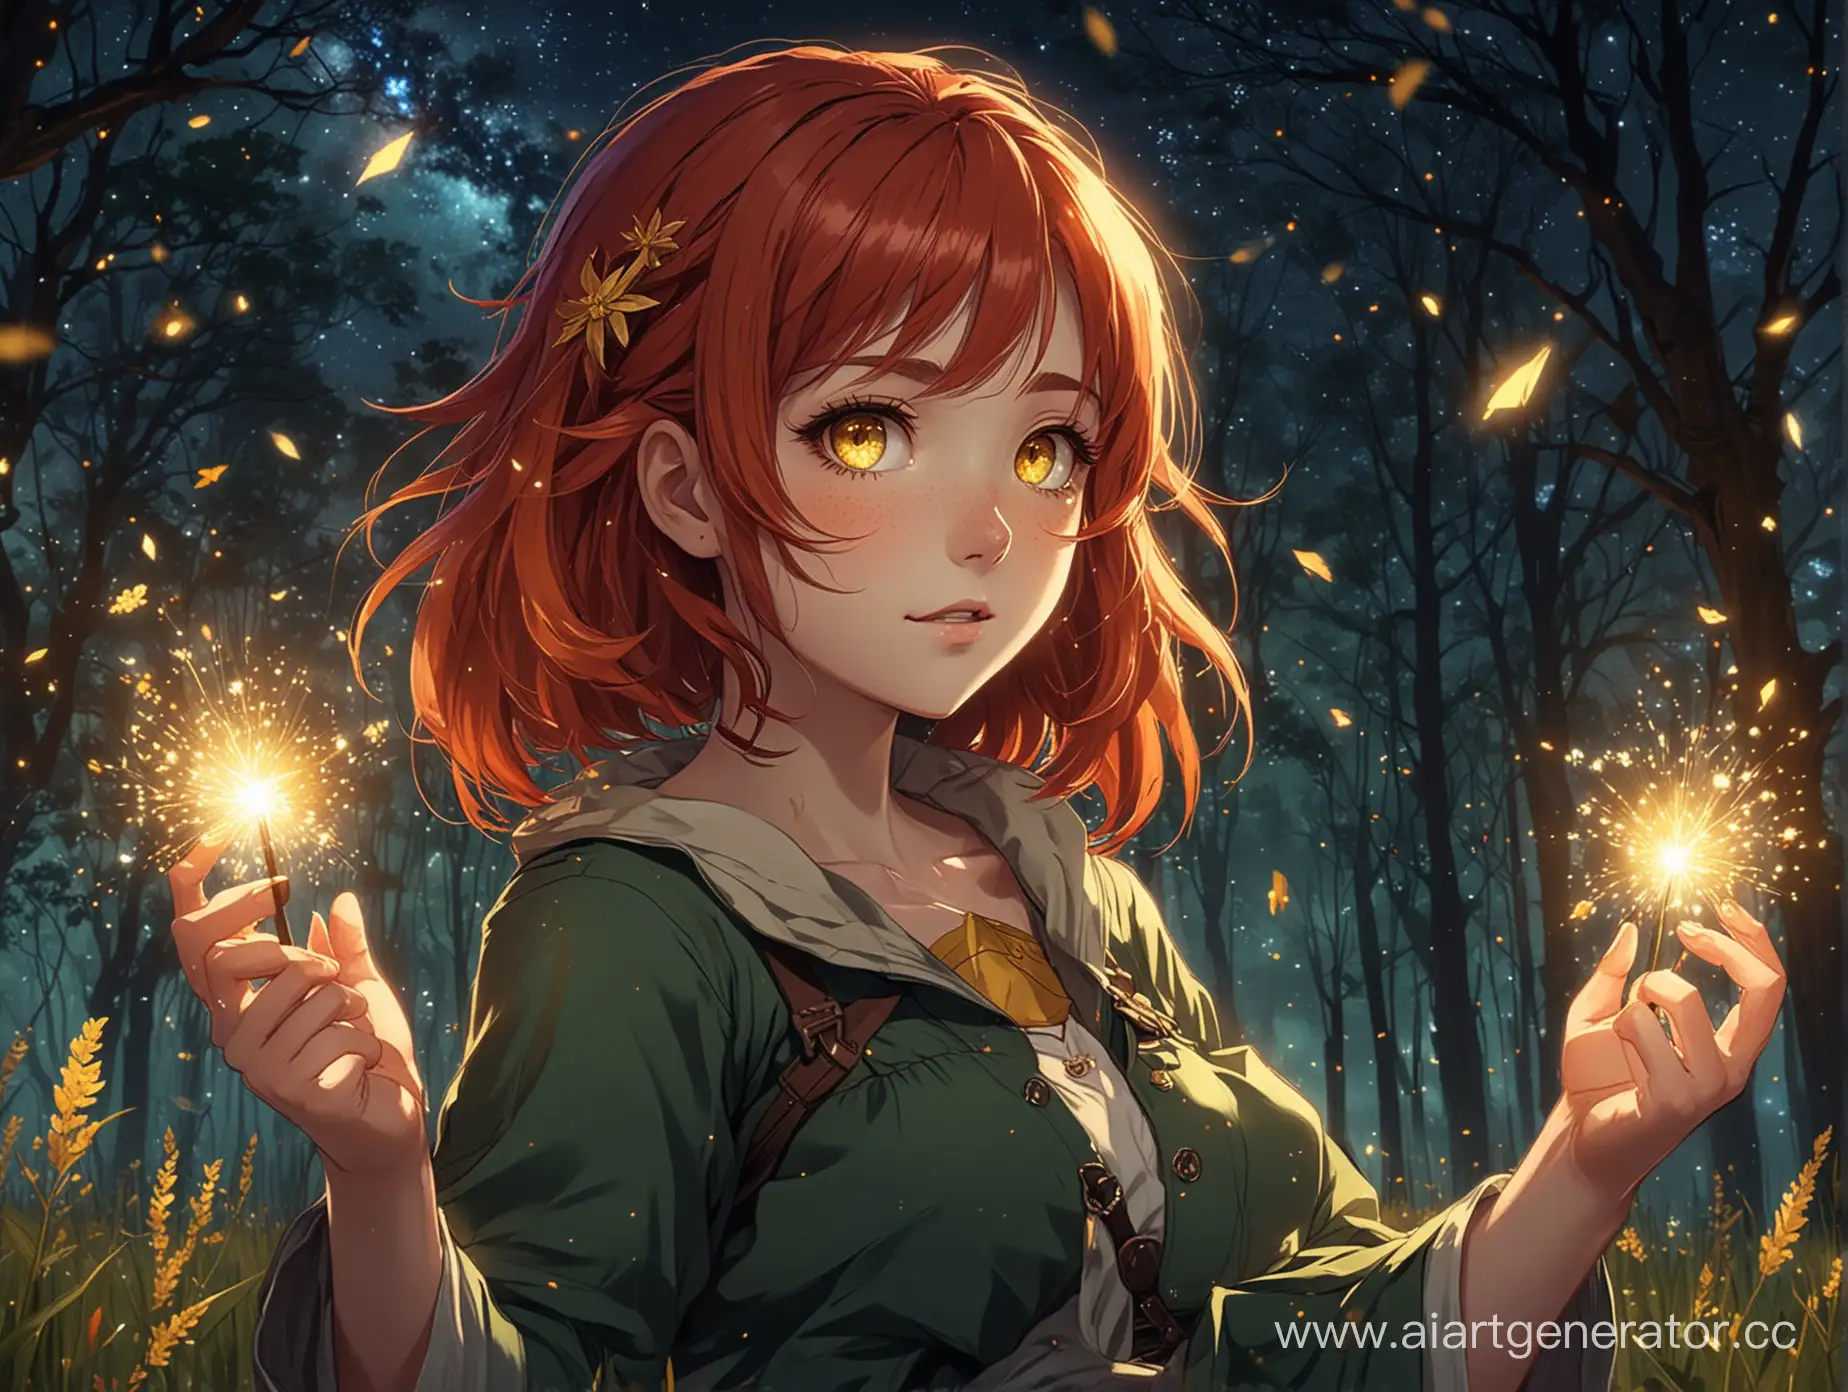 Enchanting-Anime-RedHaired-Pioneer-Embracing-Bright-Memories-Under-Starry-Night-Sky